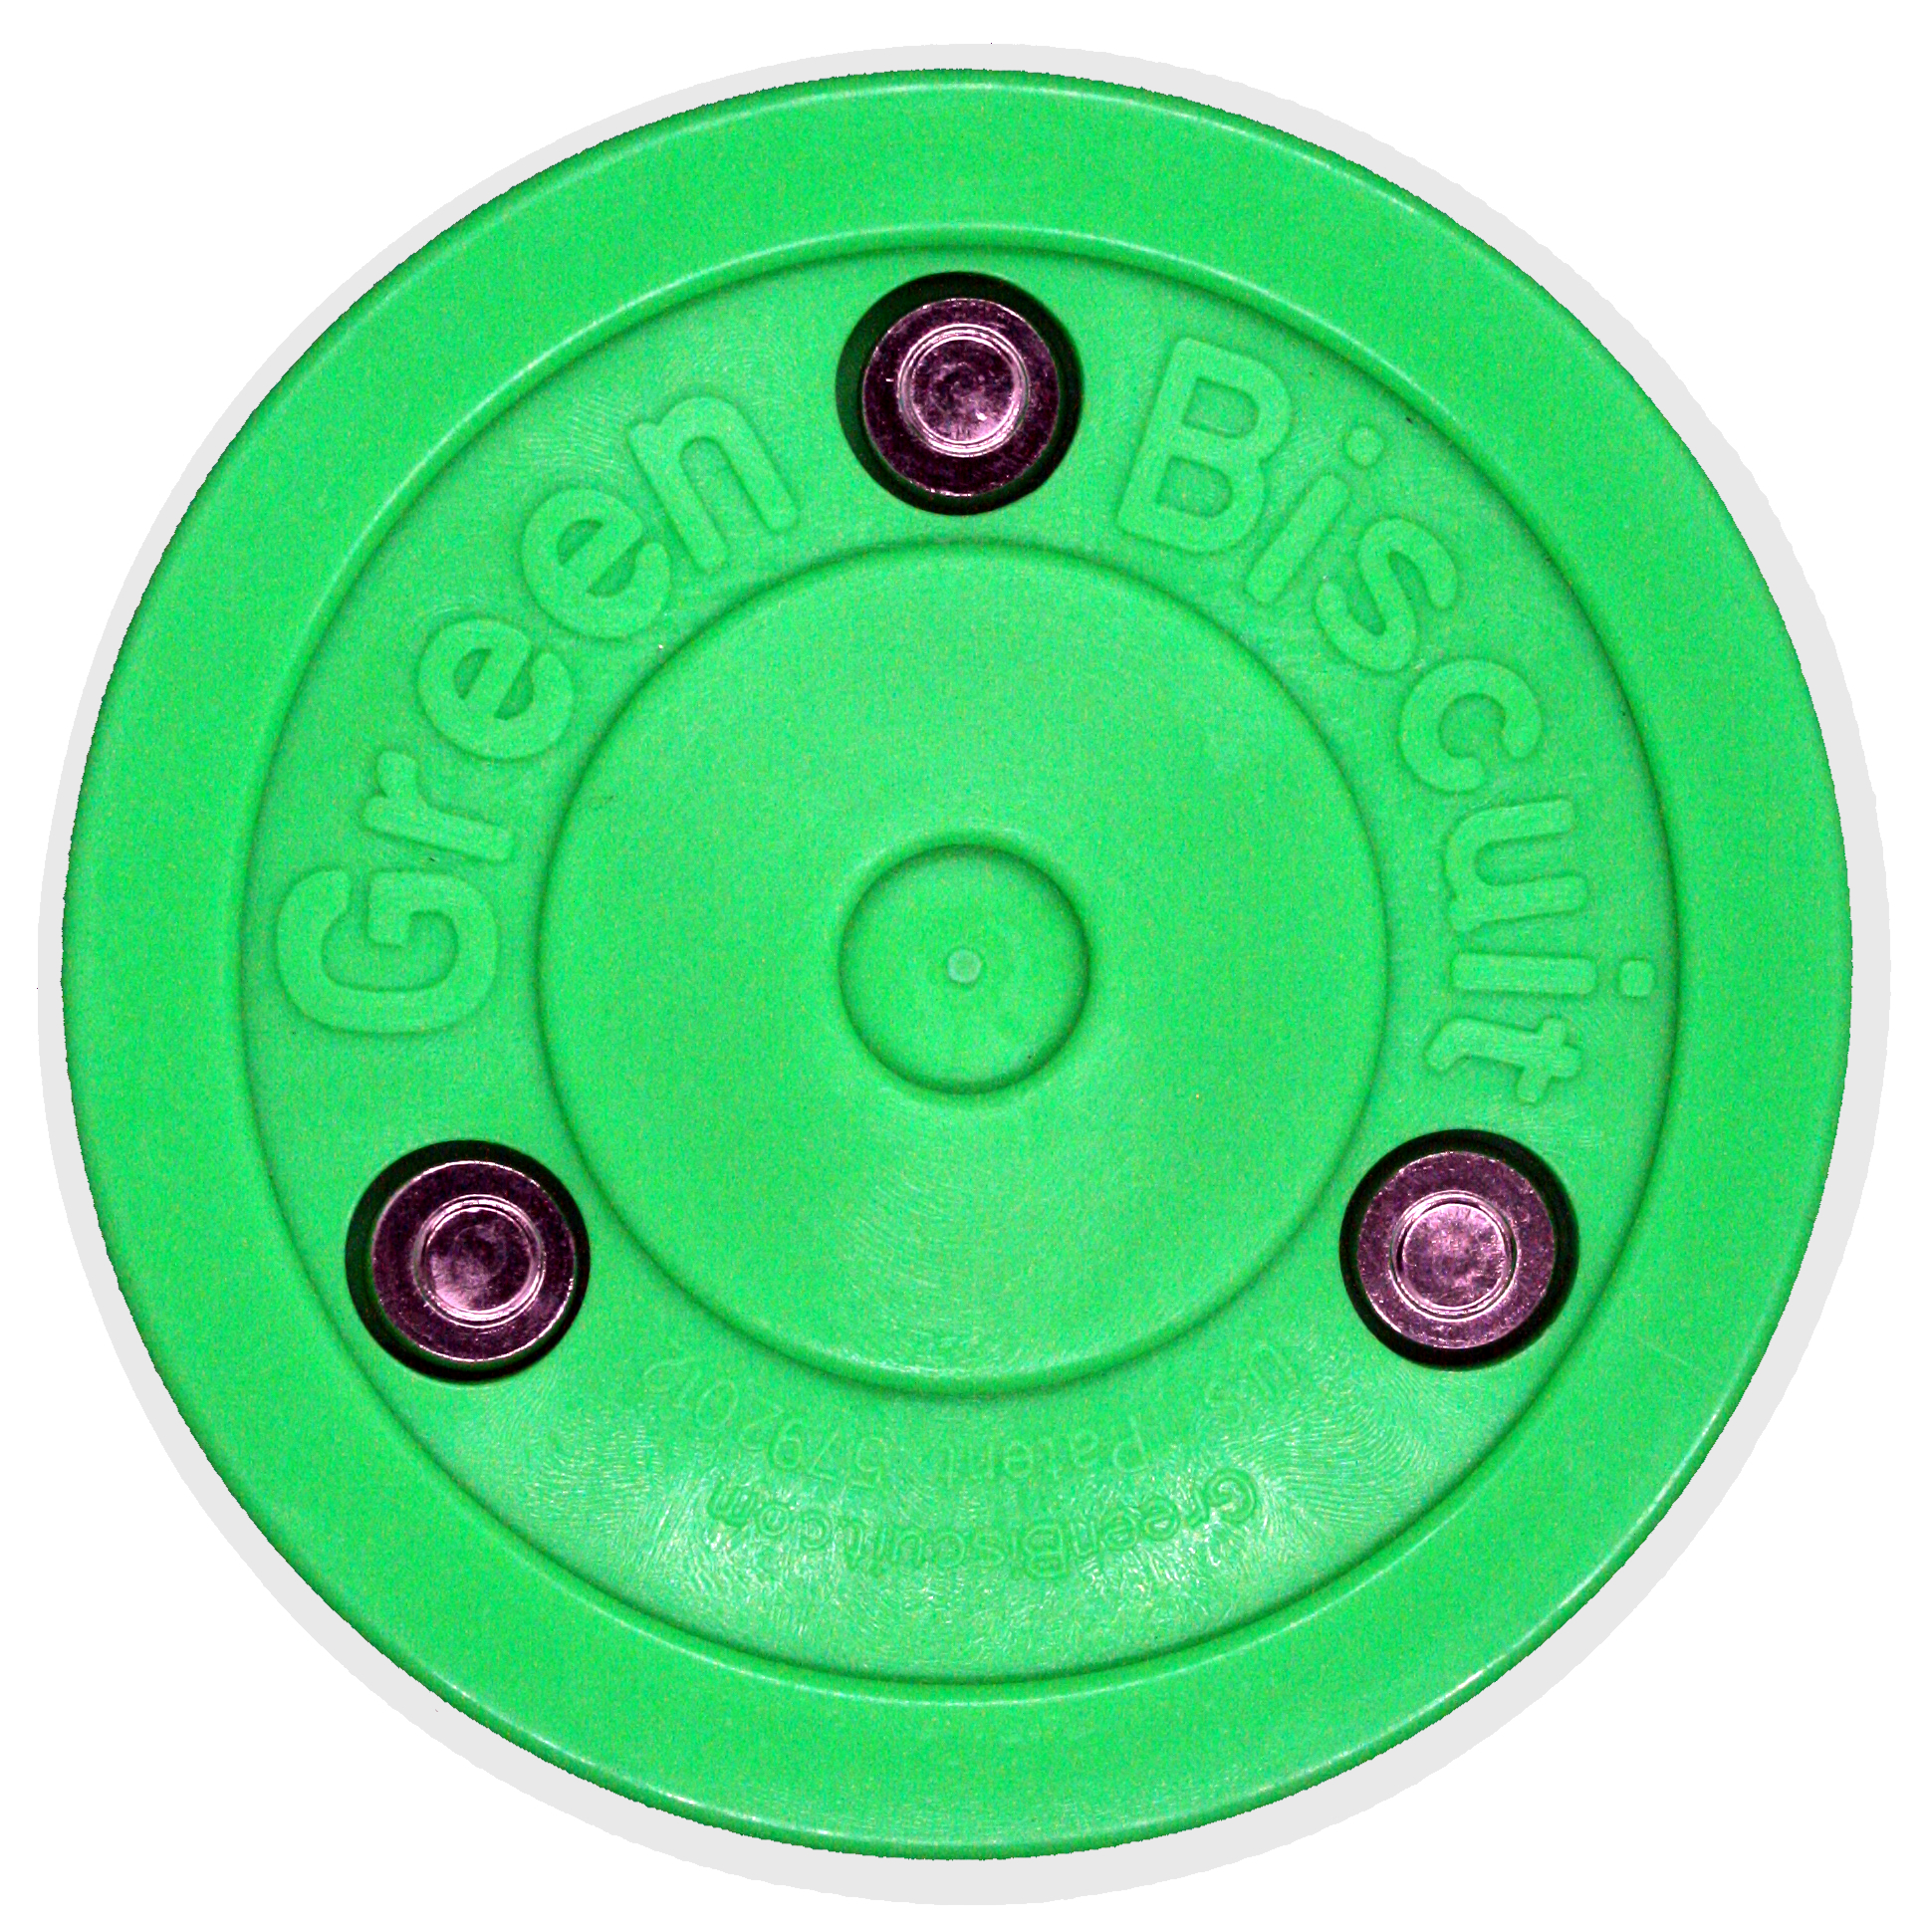 Green Biscuit Training Puck and Tape Bundle for Off Ice Hockey Training and Practice Hockey Wraparound